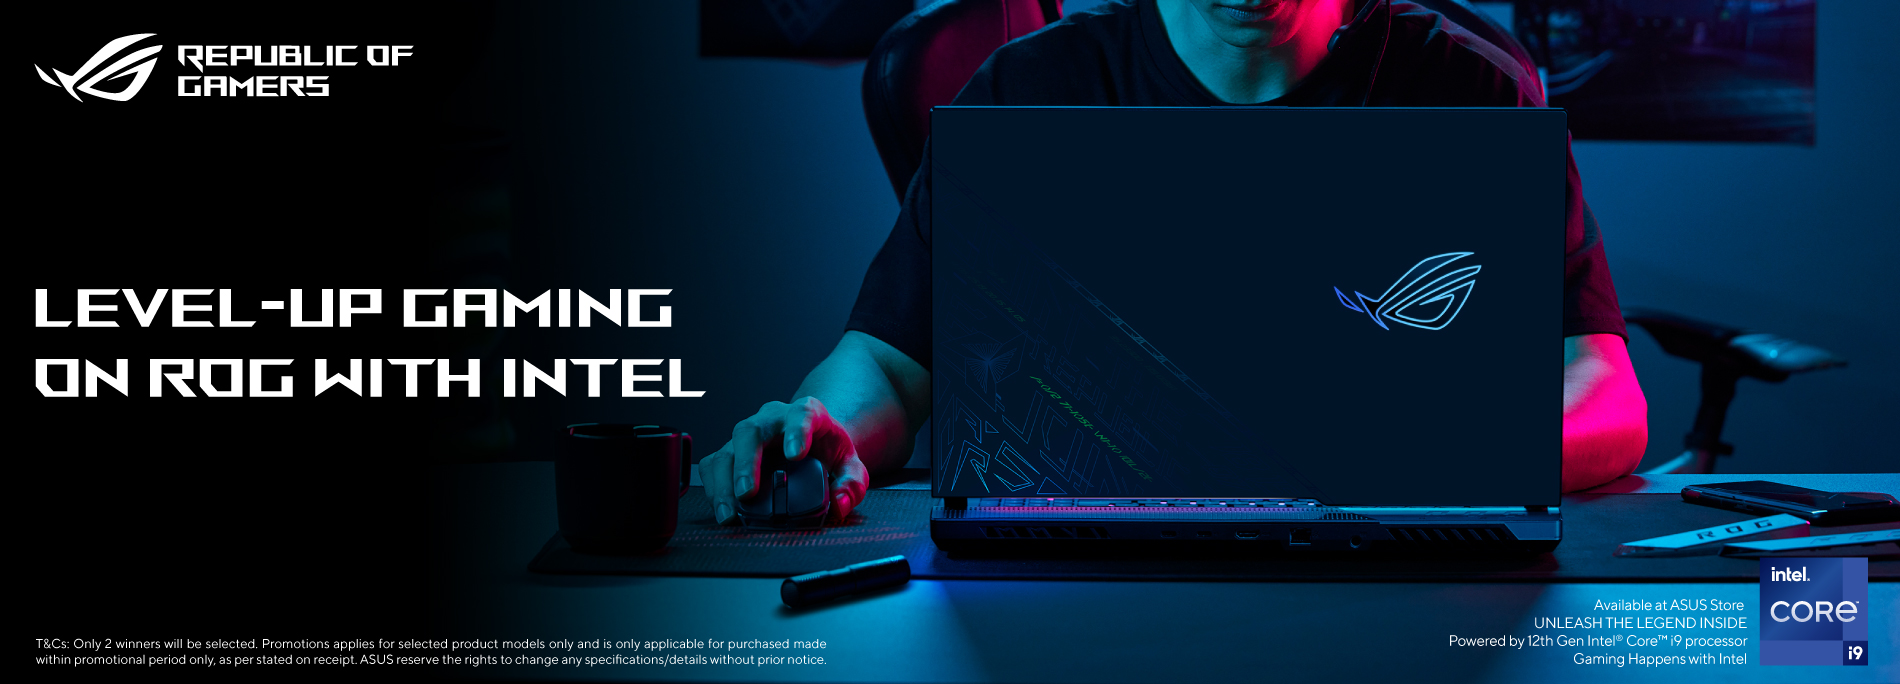 Level-up Gaming With Intel